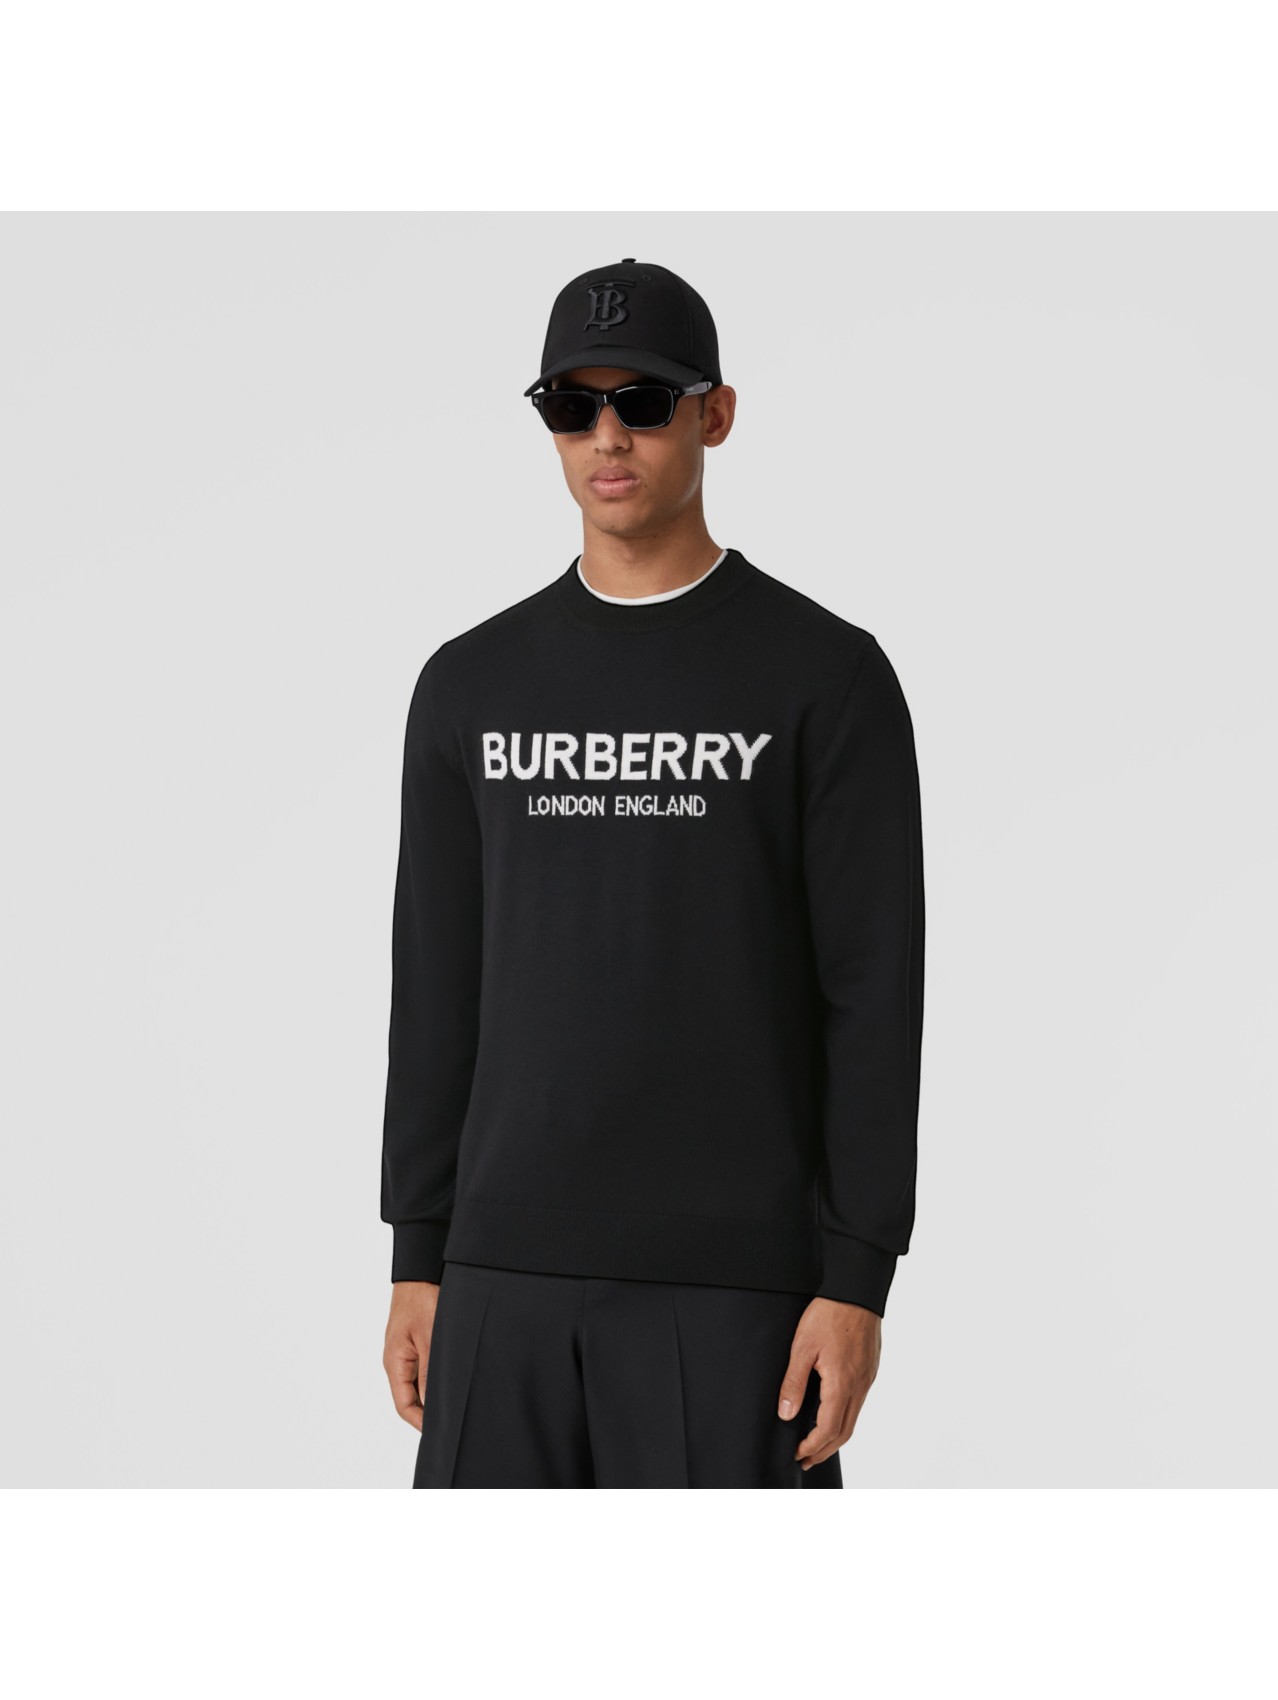 Men’s Designer Knitwear | Sweaters & Cardigans | Burberry® Official